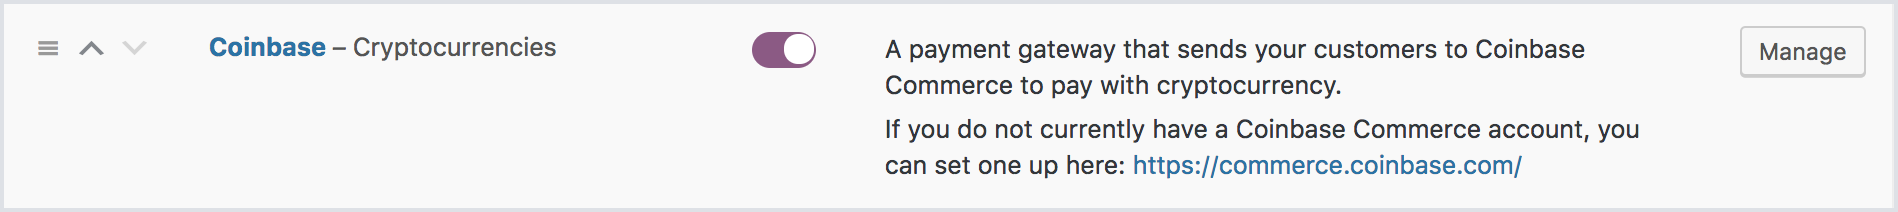 Coinbase in the list of available payment gateways.